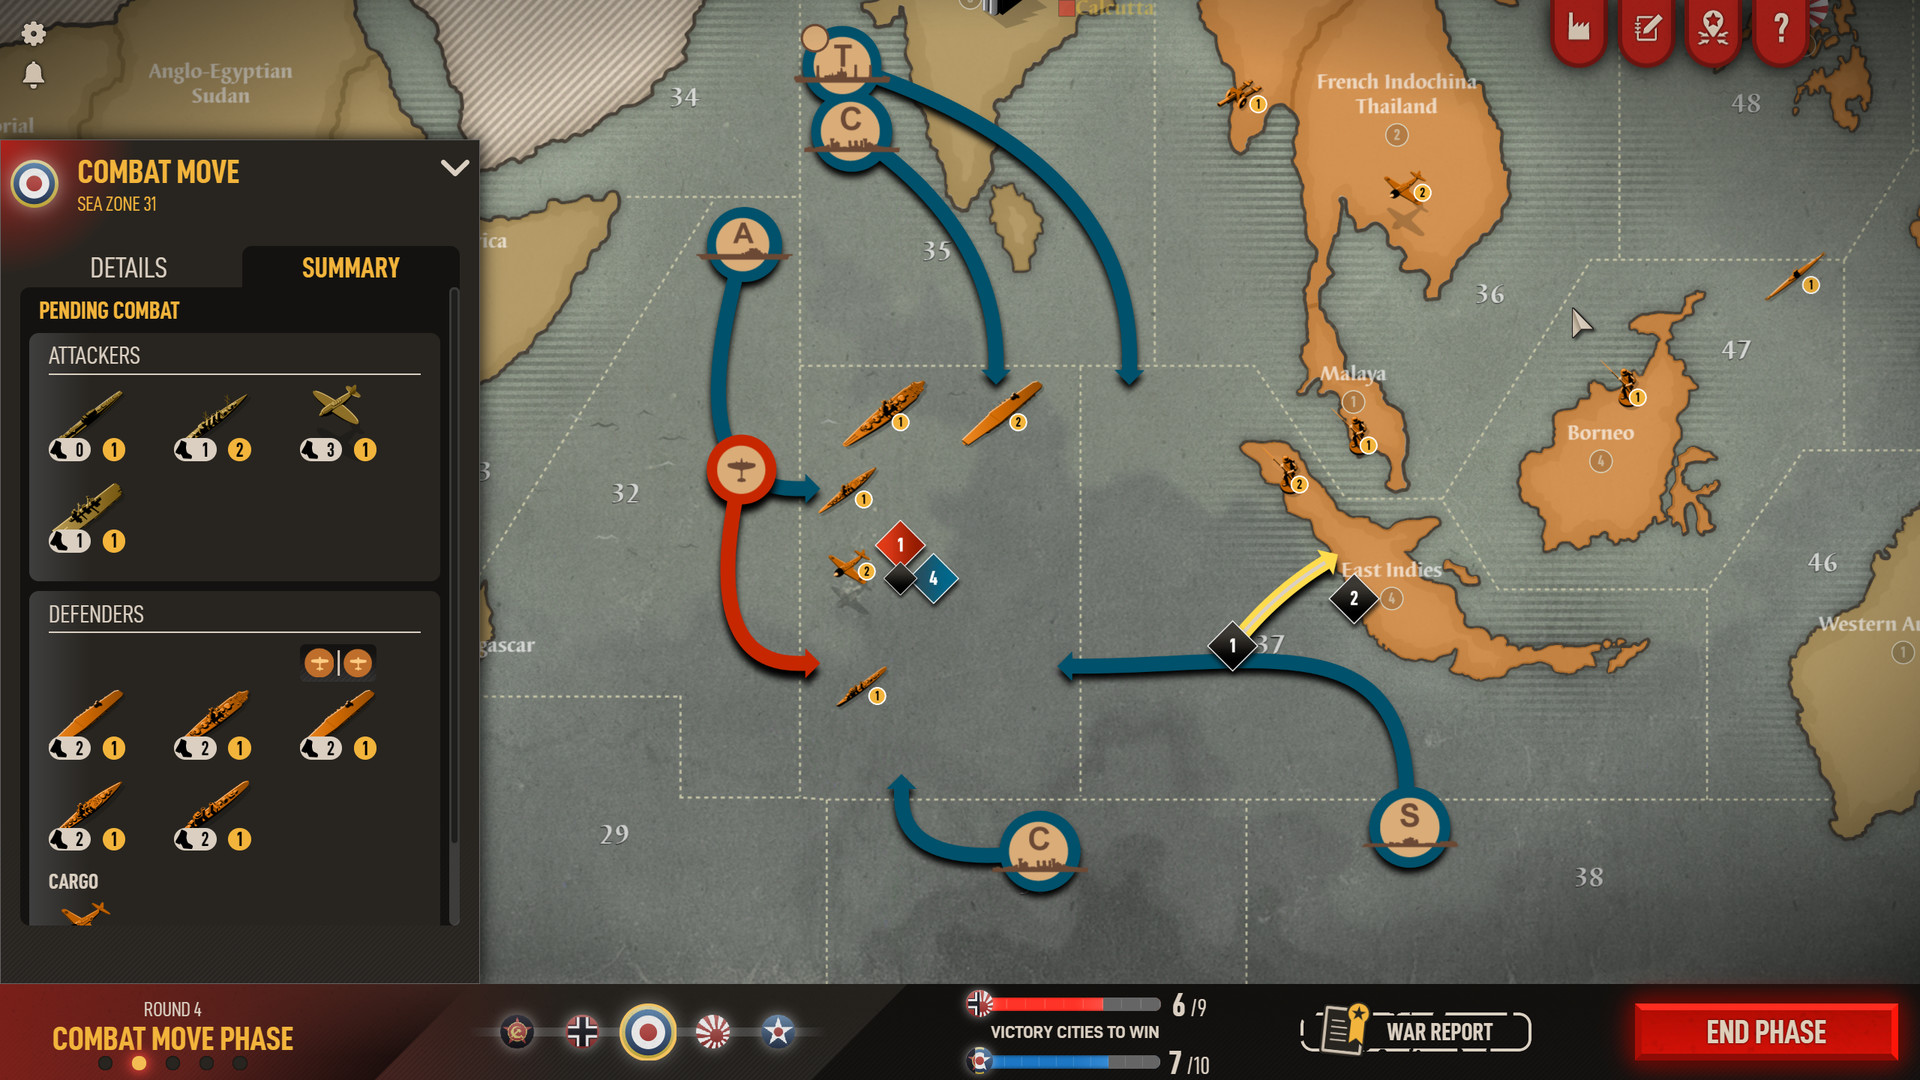 axis & allies online